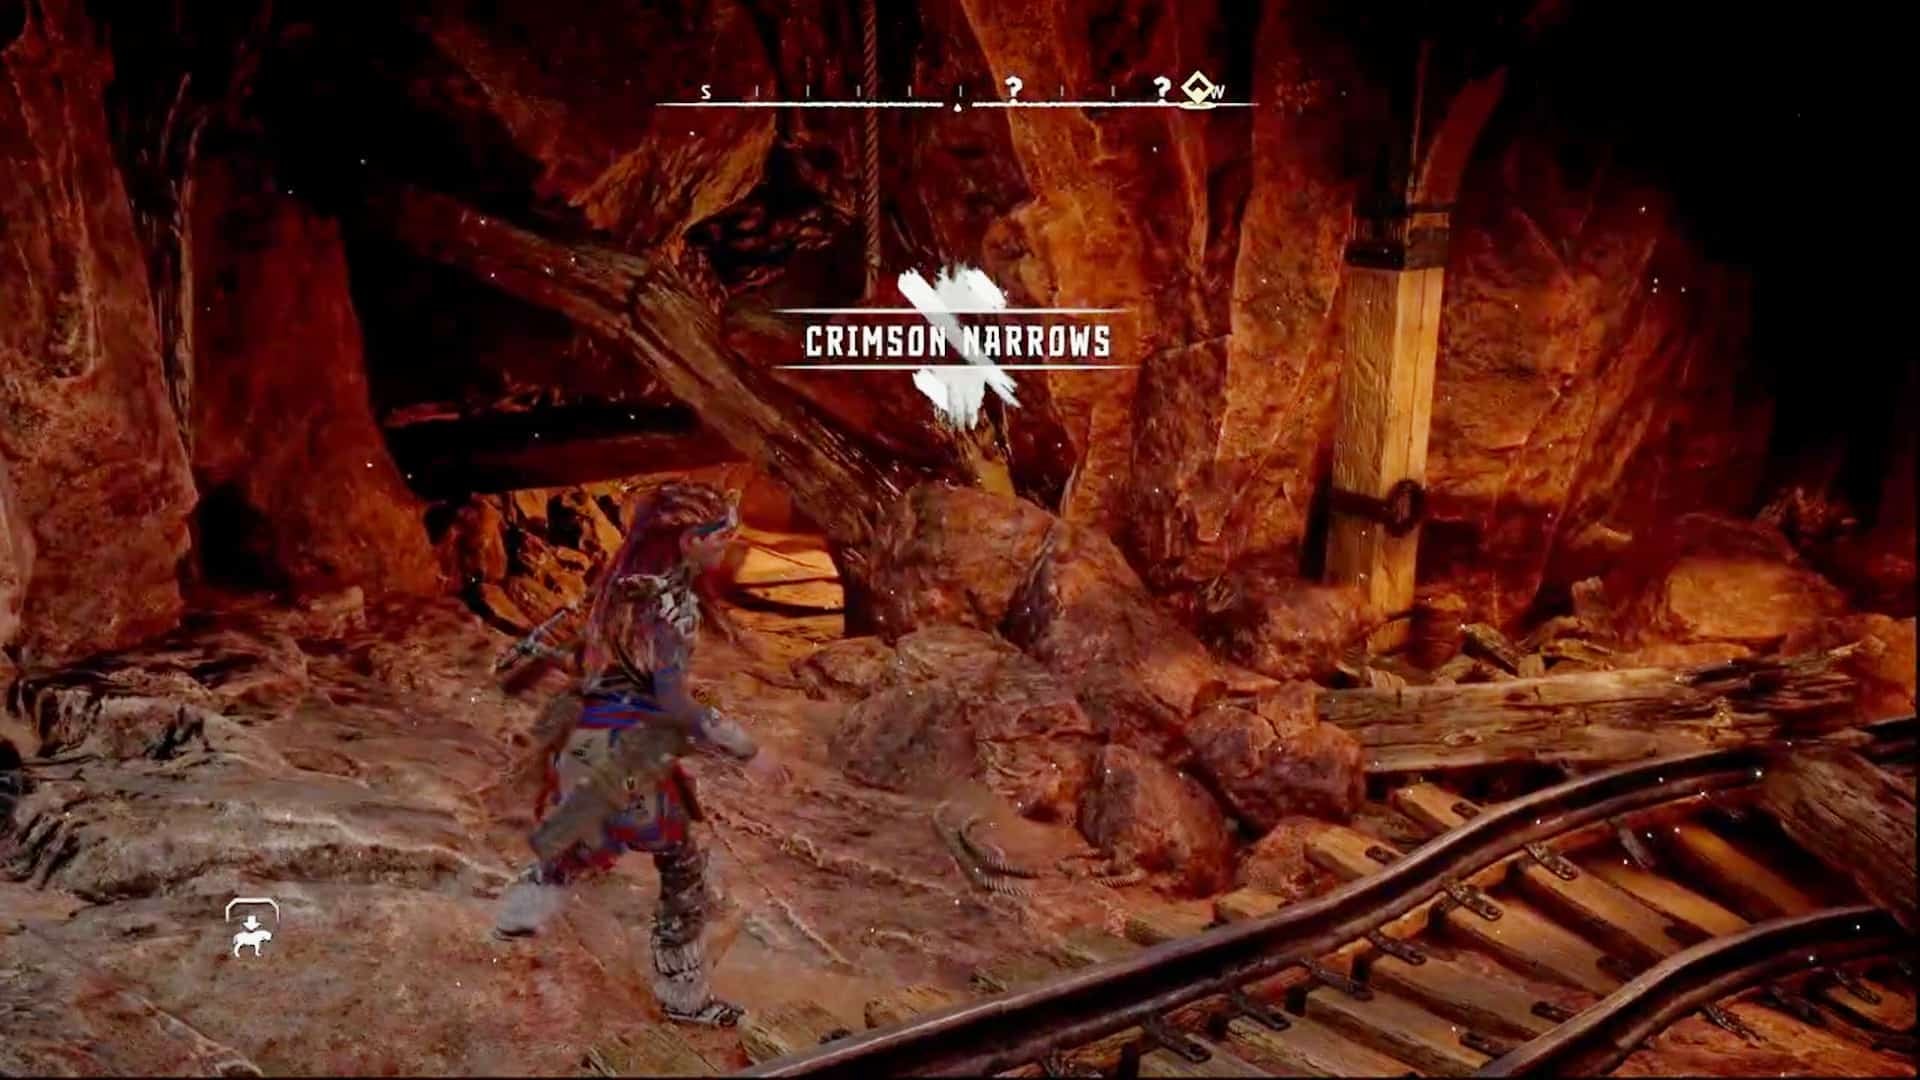 Aloy entering the Crimson Narrows mine. The rocks are dark red and there are rail tracks nearby.